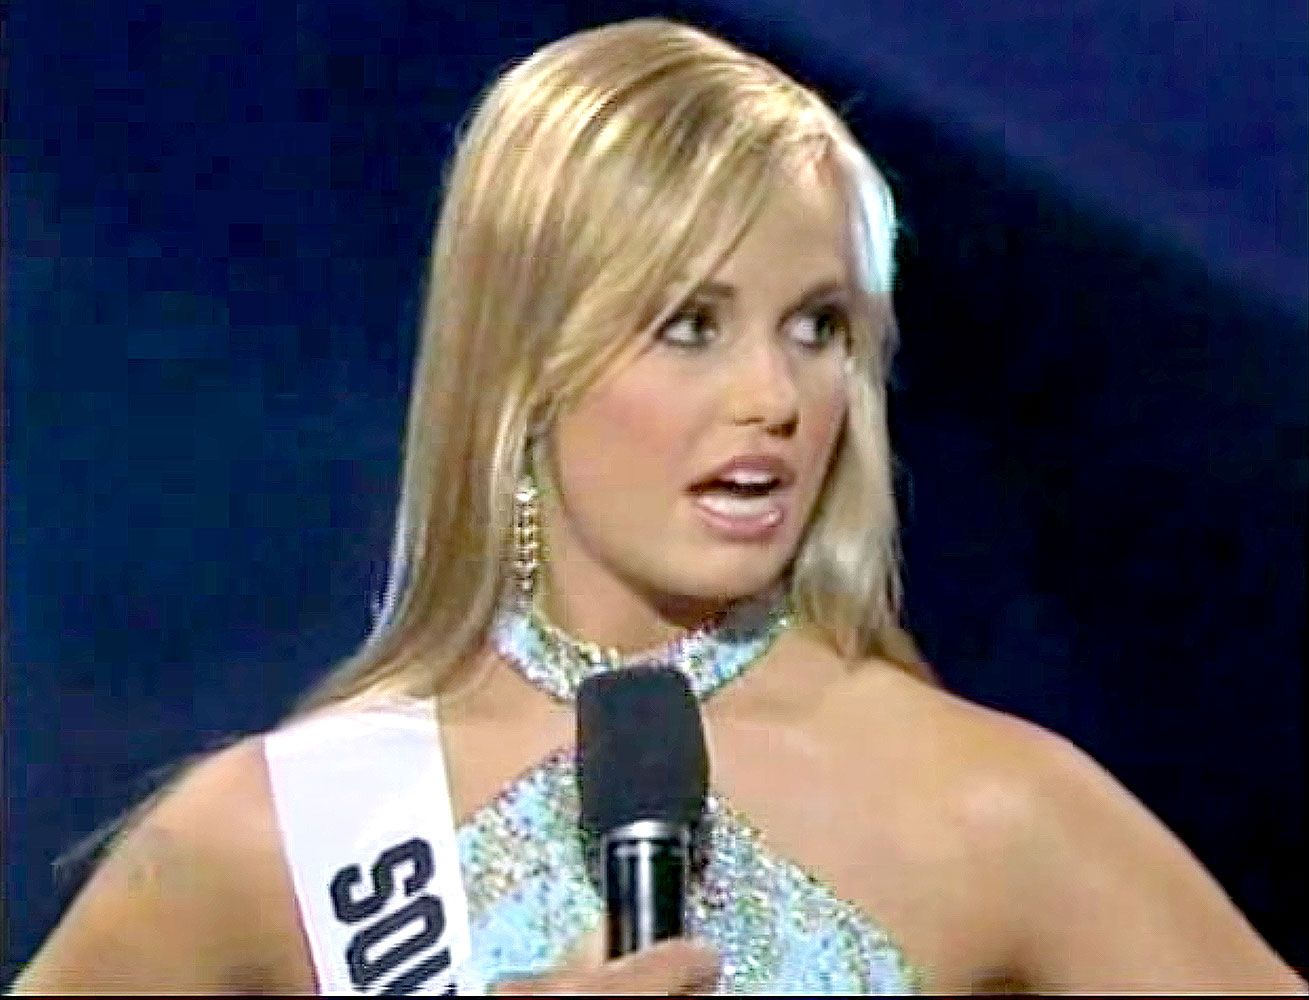 Miss teen south carolina answers a question